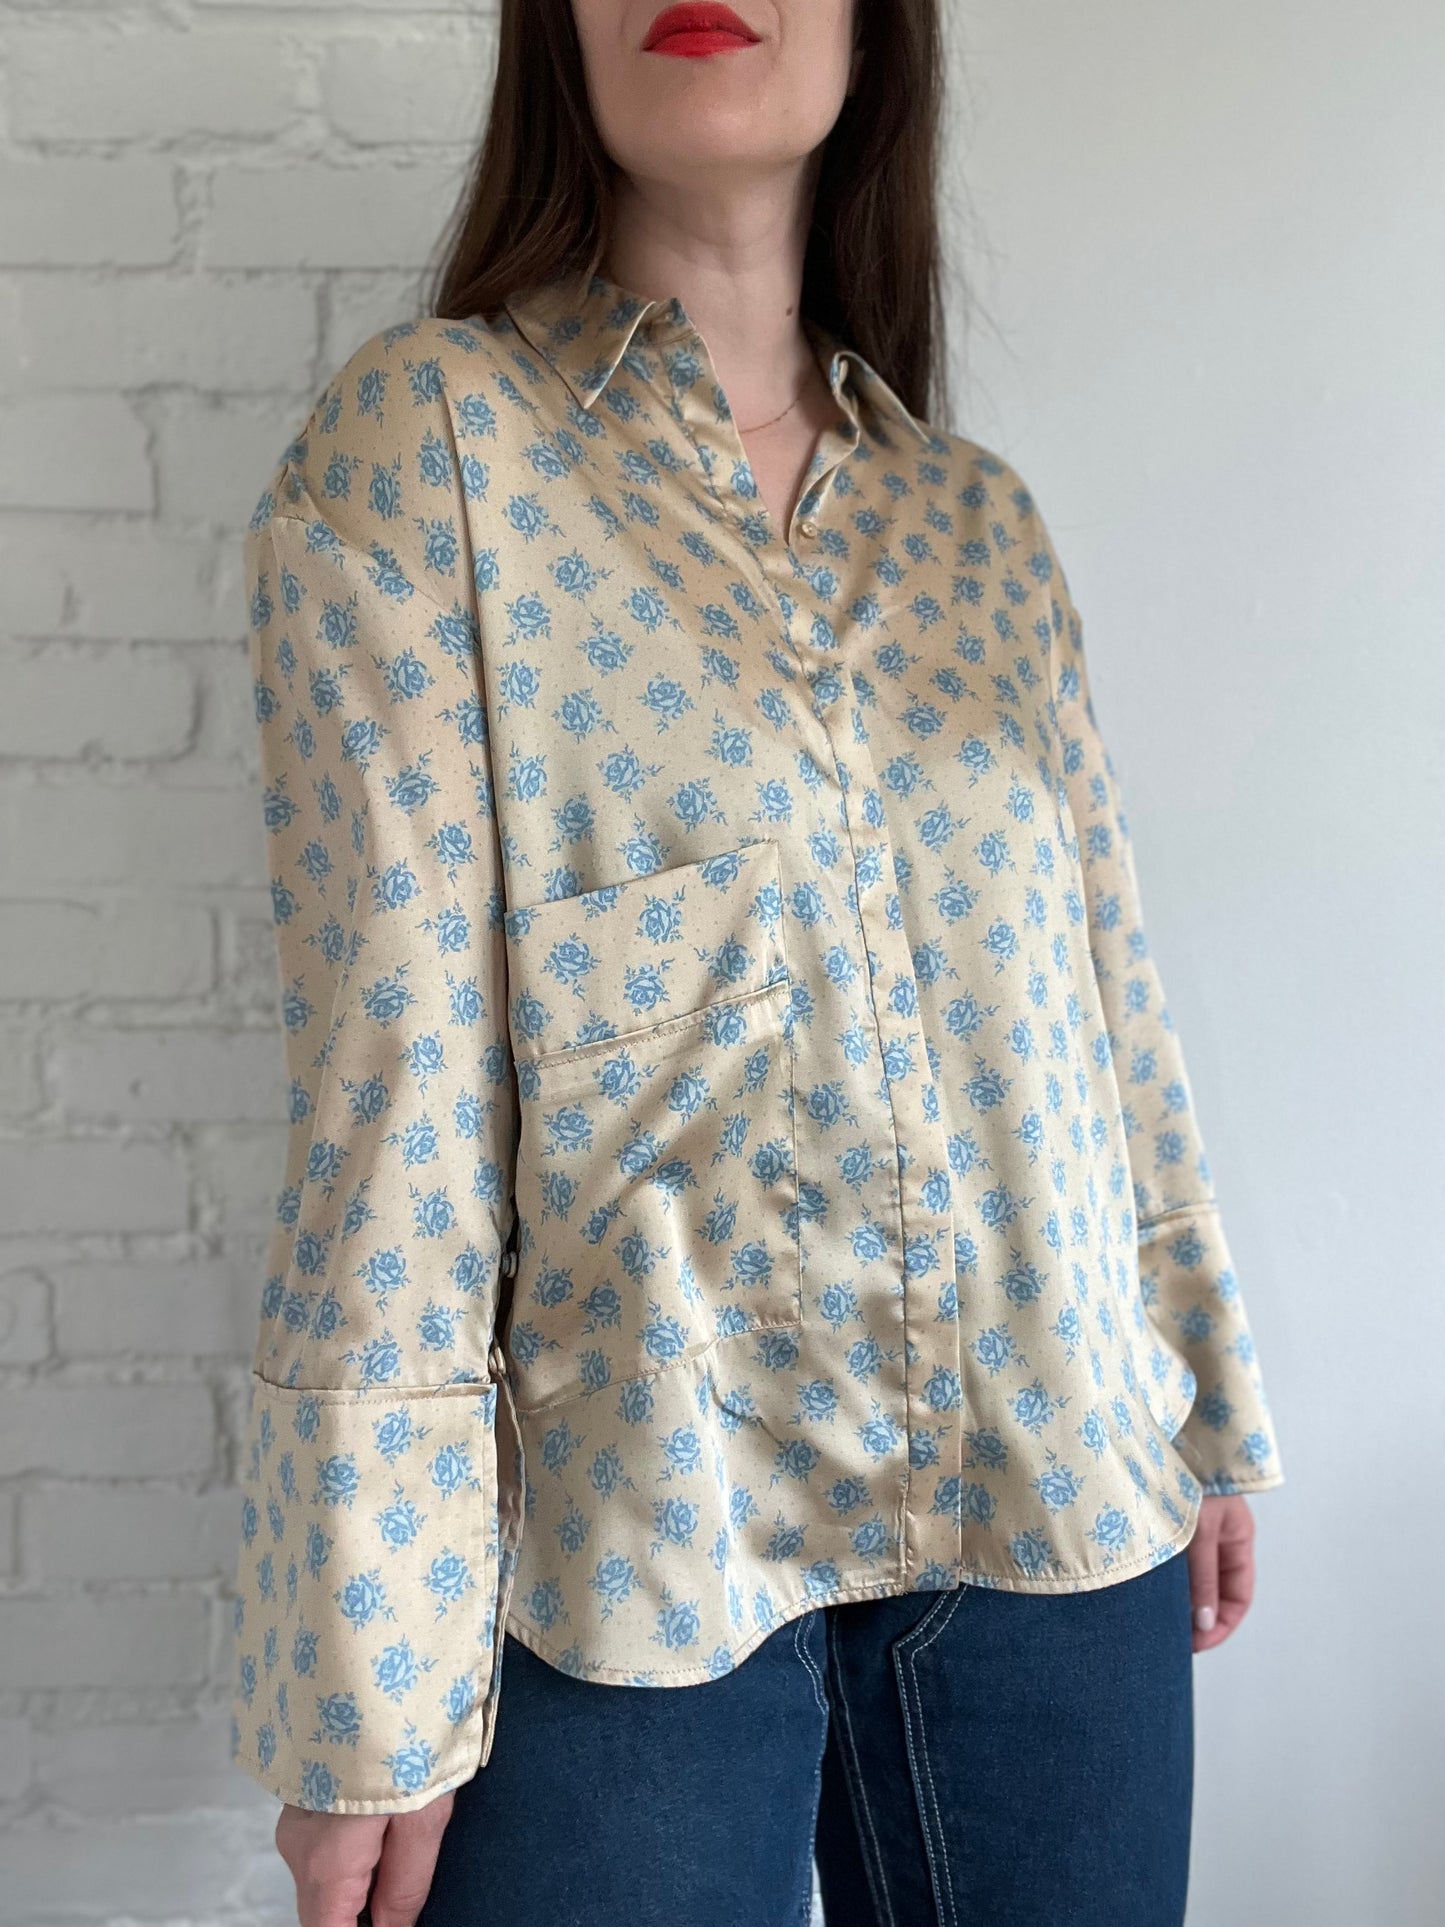 Oversized Floral Neutral Top - XS (oversized)